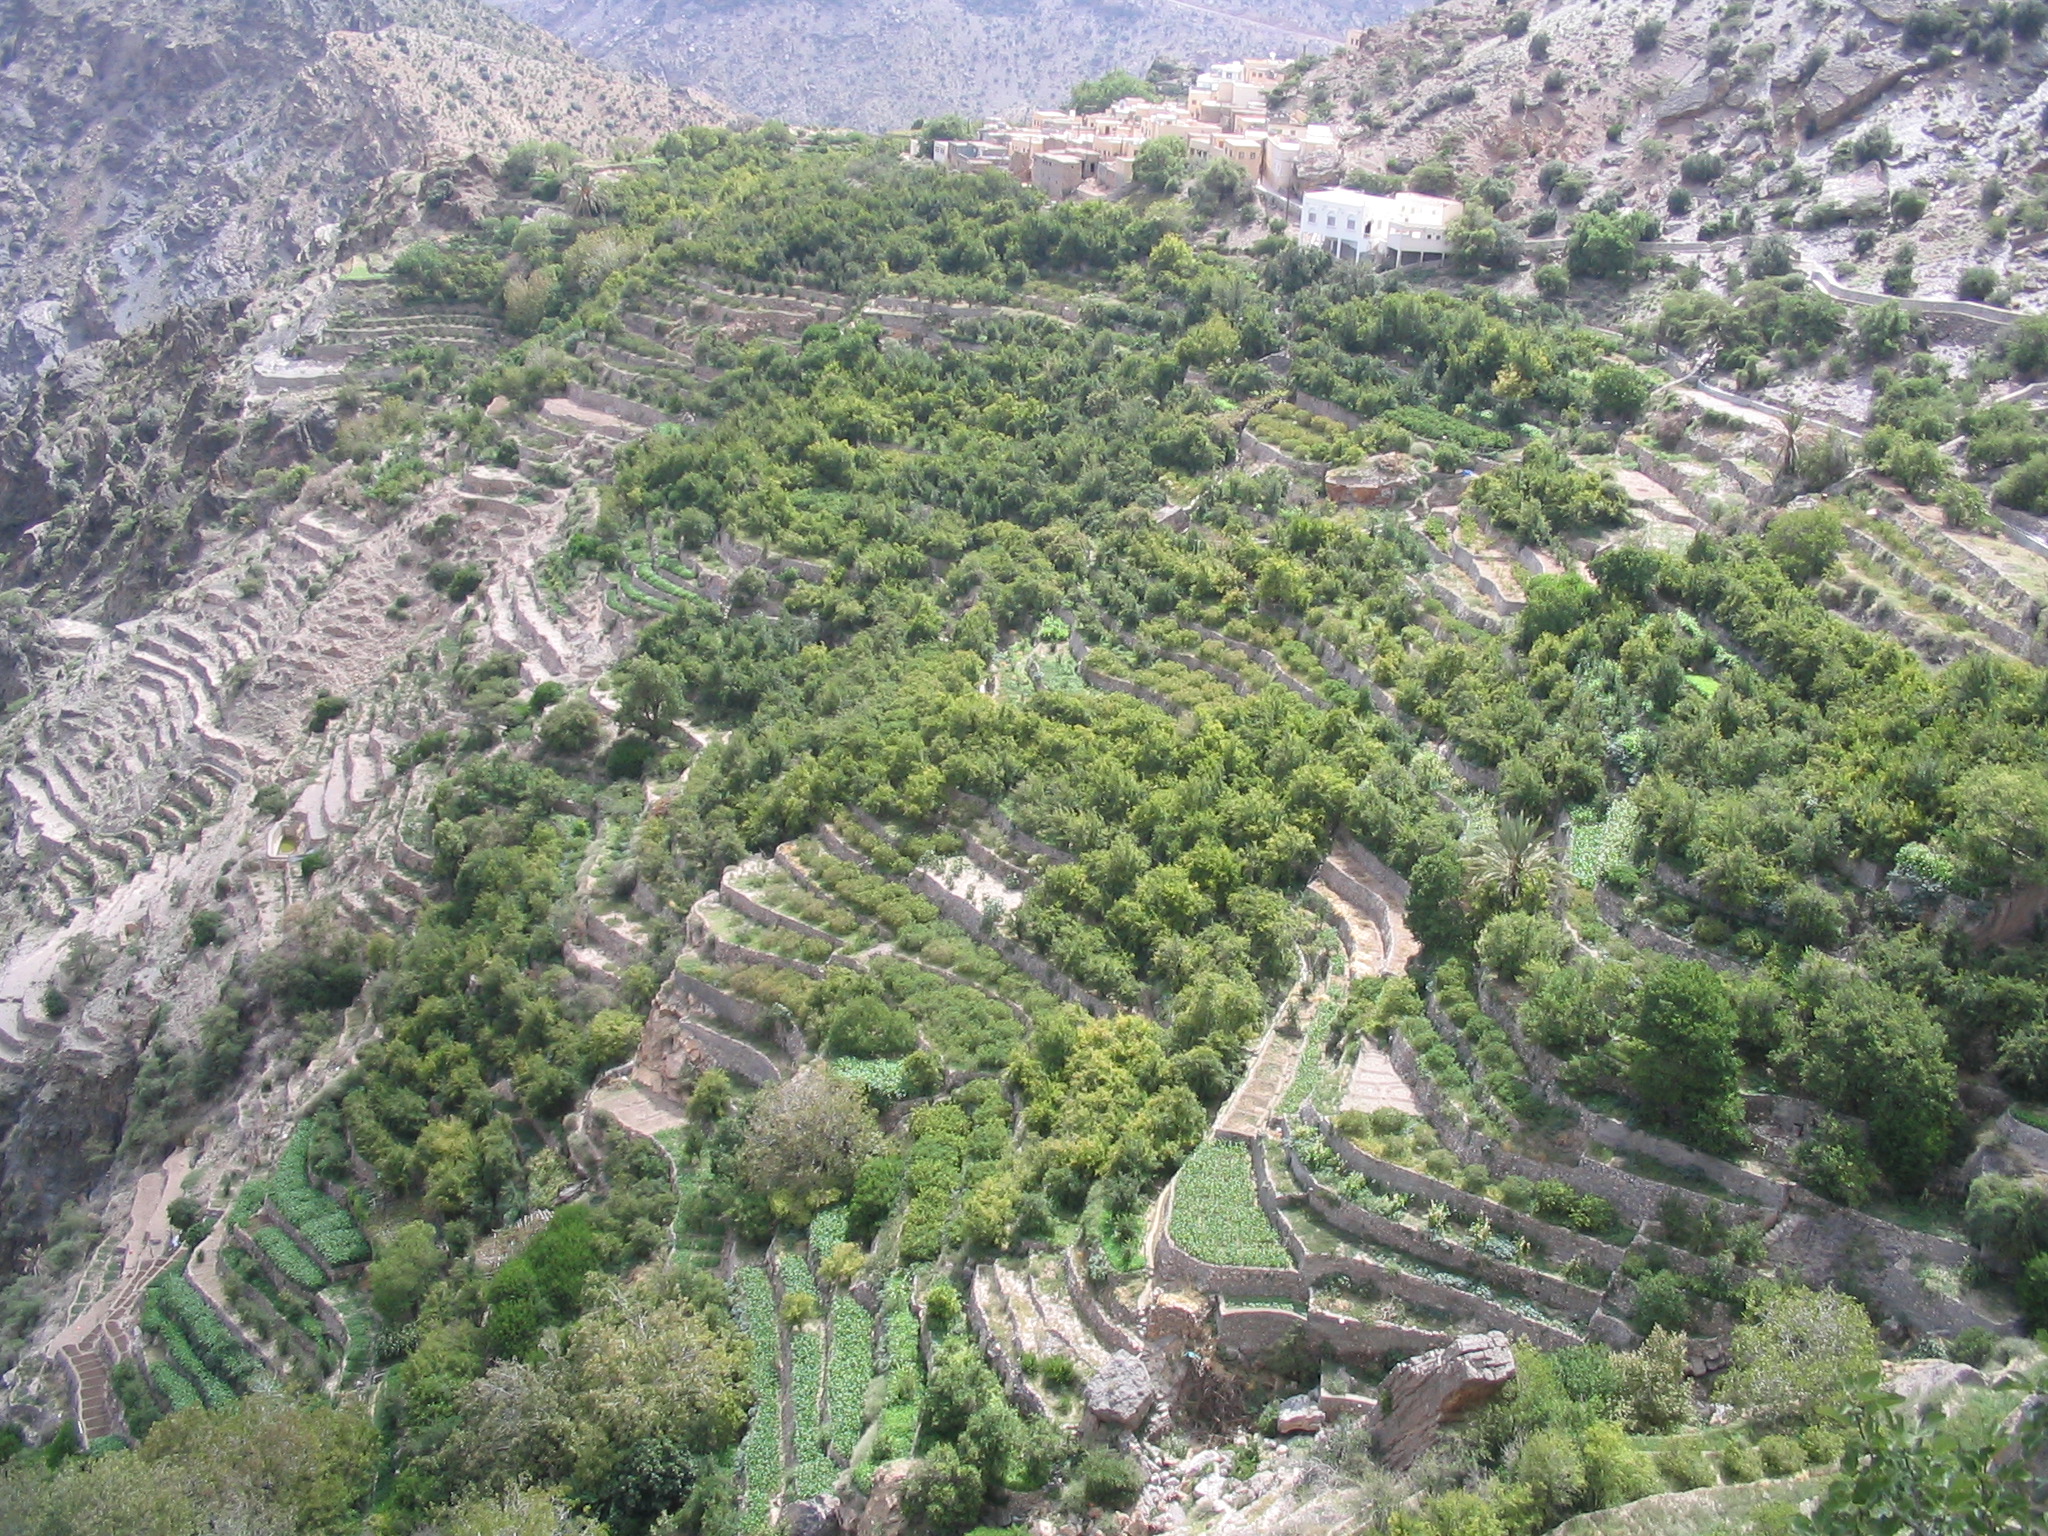 The ‘Hanging Gardens’ of Ash Sharayjah, one of the oases of Al Jabal Al Akhdar